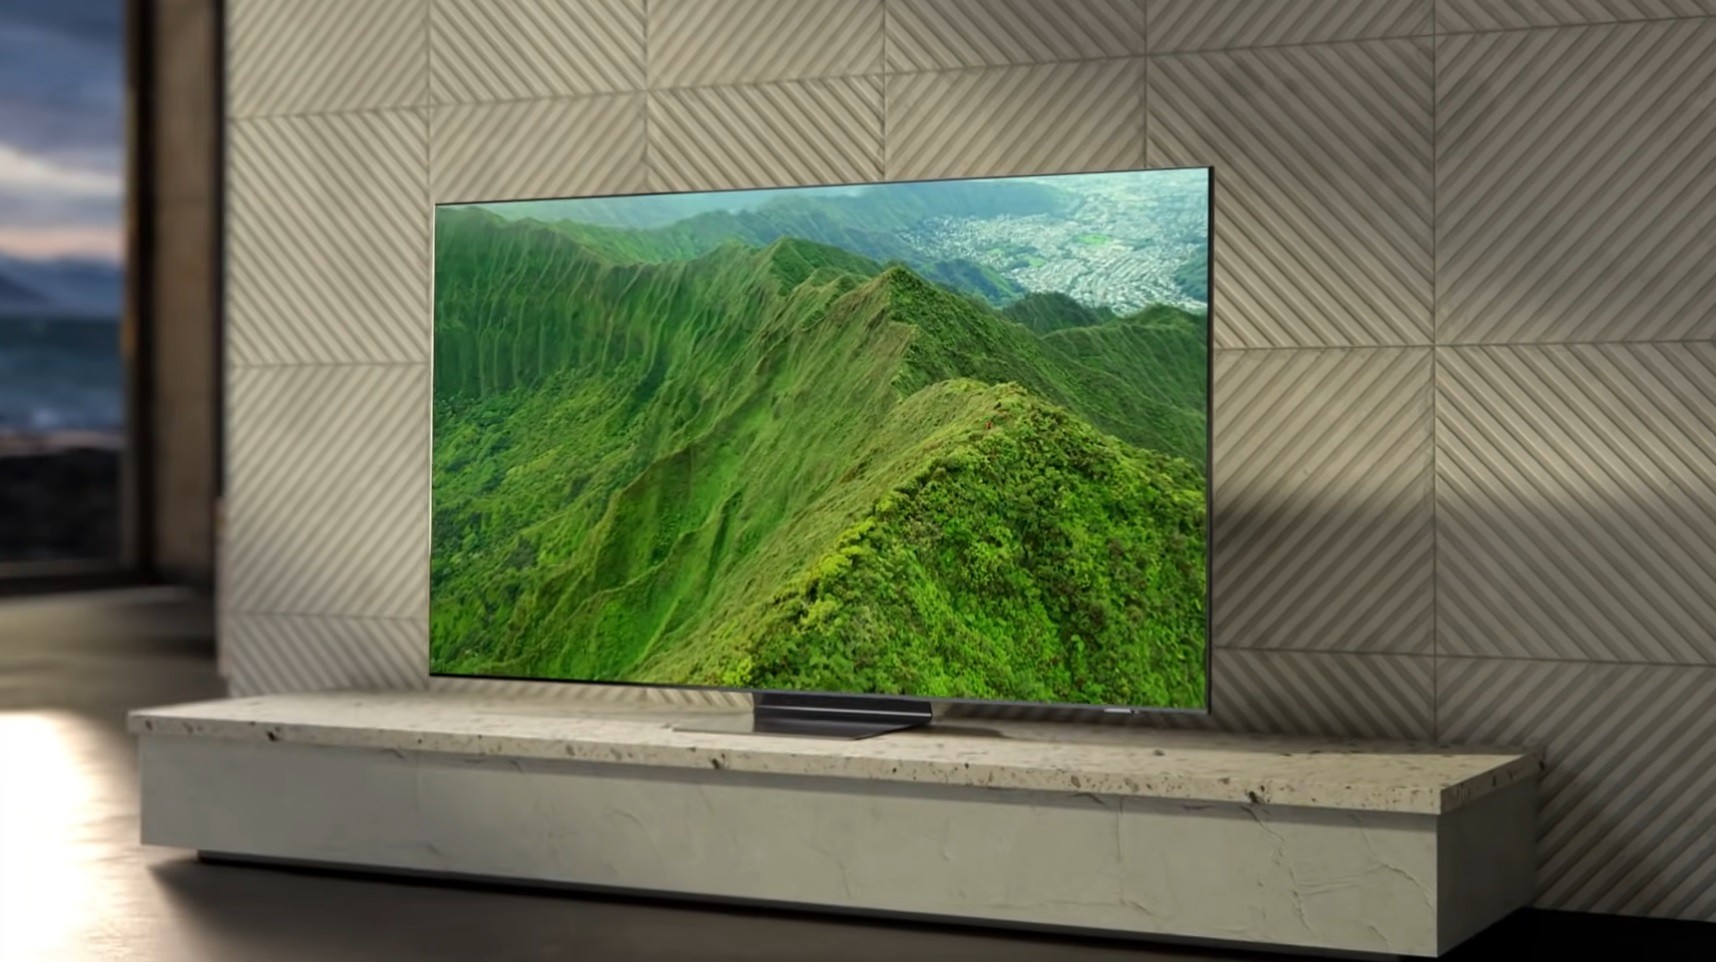 Discover Samsung Week lets you buy a Samsung Neo QLED 4K Smart TV for just $360!